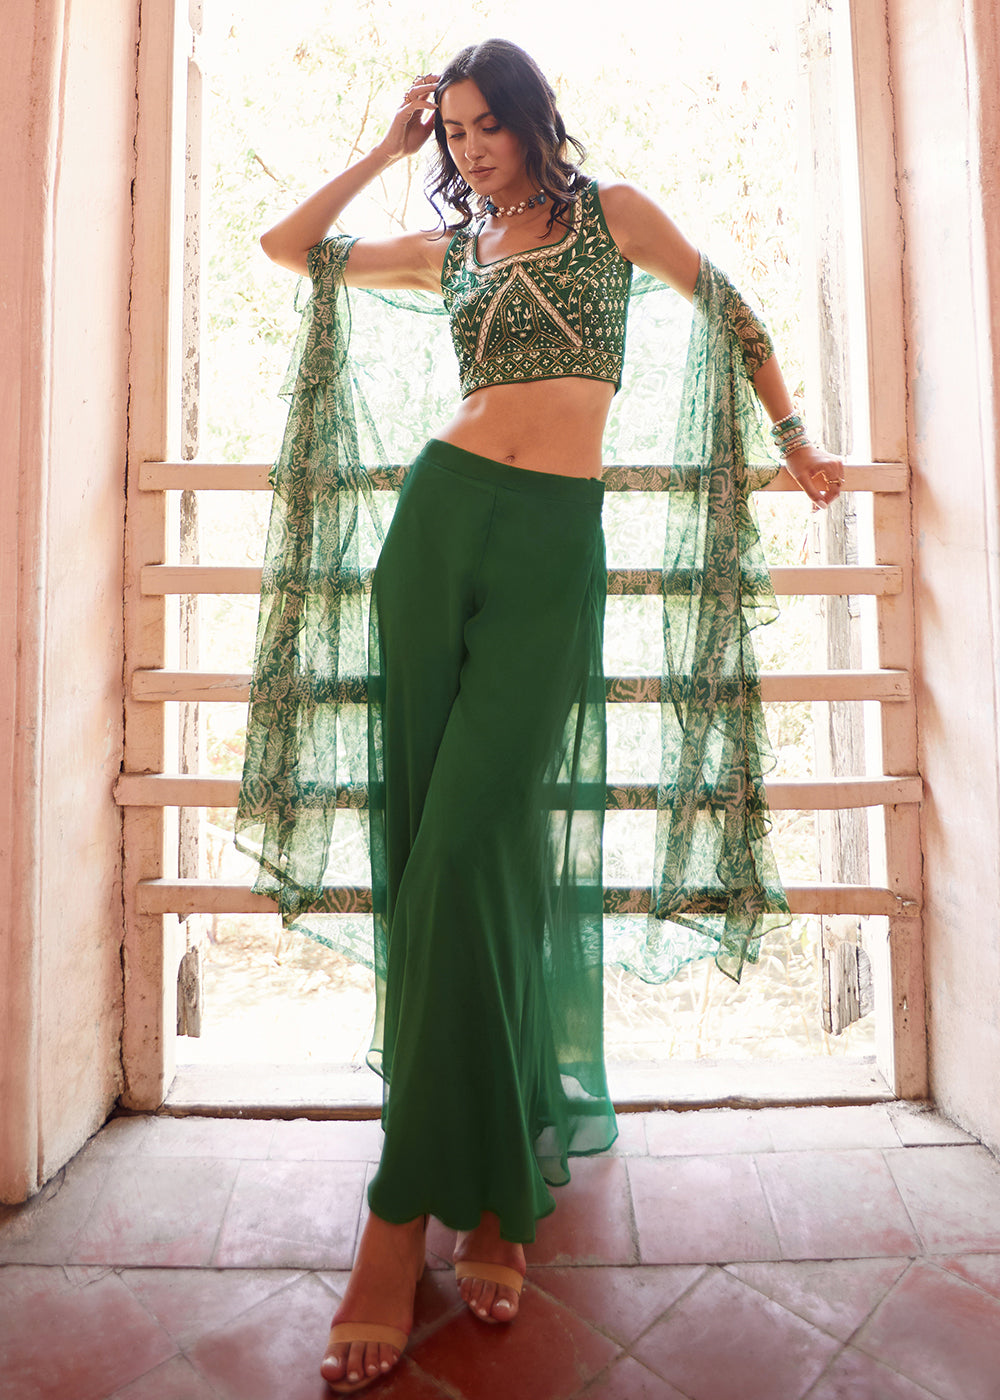 Shop Now Stunning Green Designer Crop Top Style Sharara Suit Online at Empress Clothing in USA, UK, Canada, Italy & Worldwide.